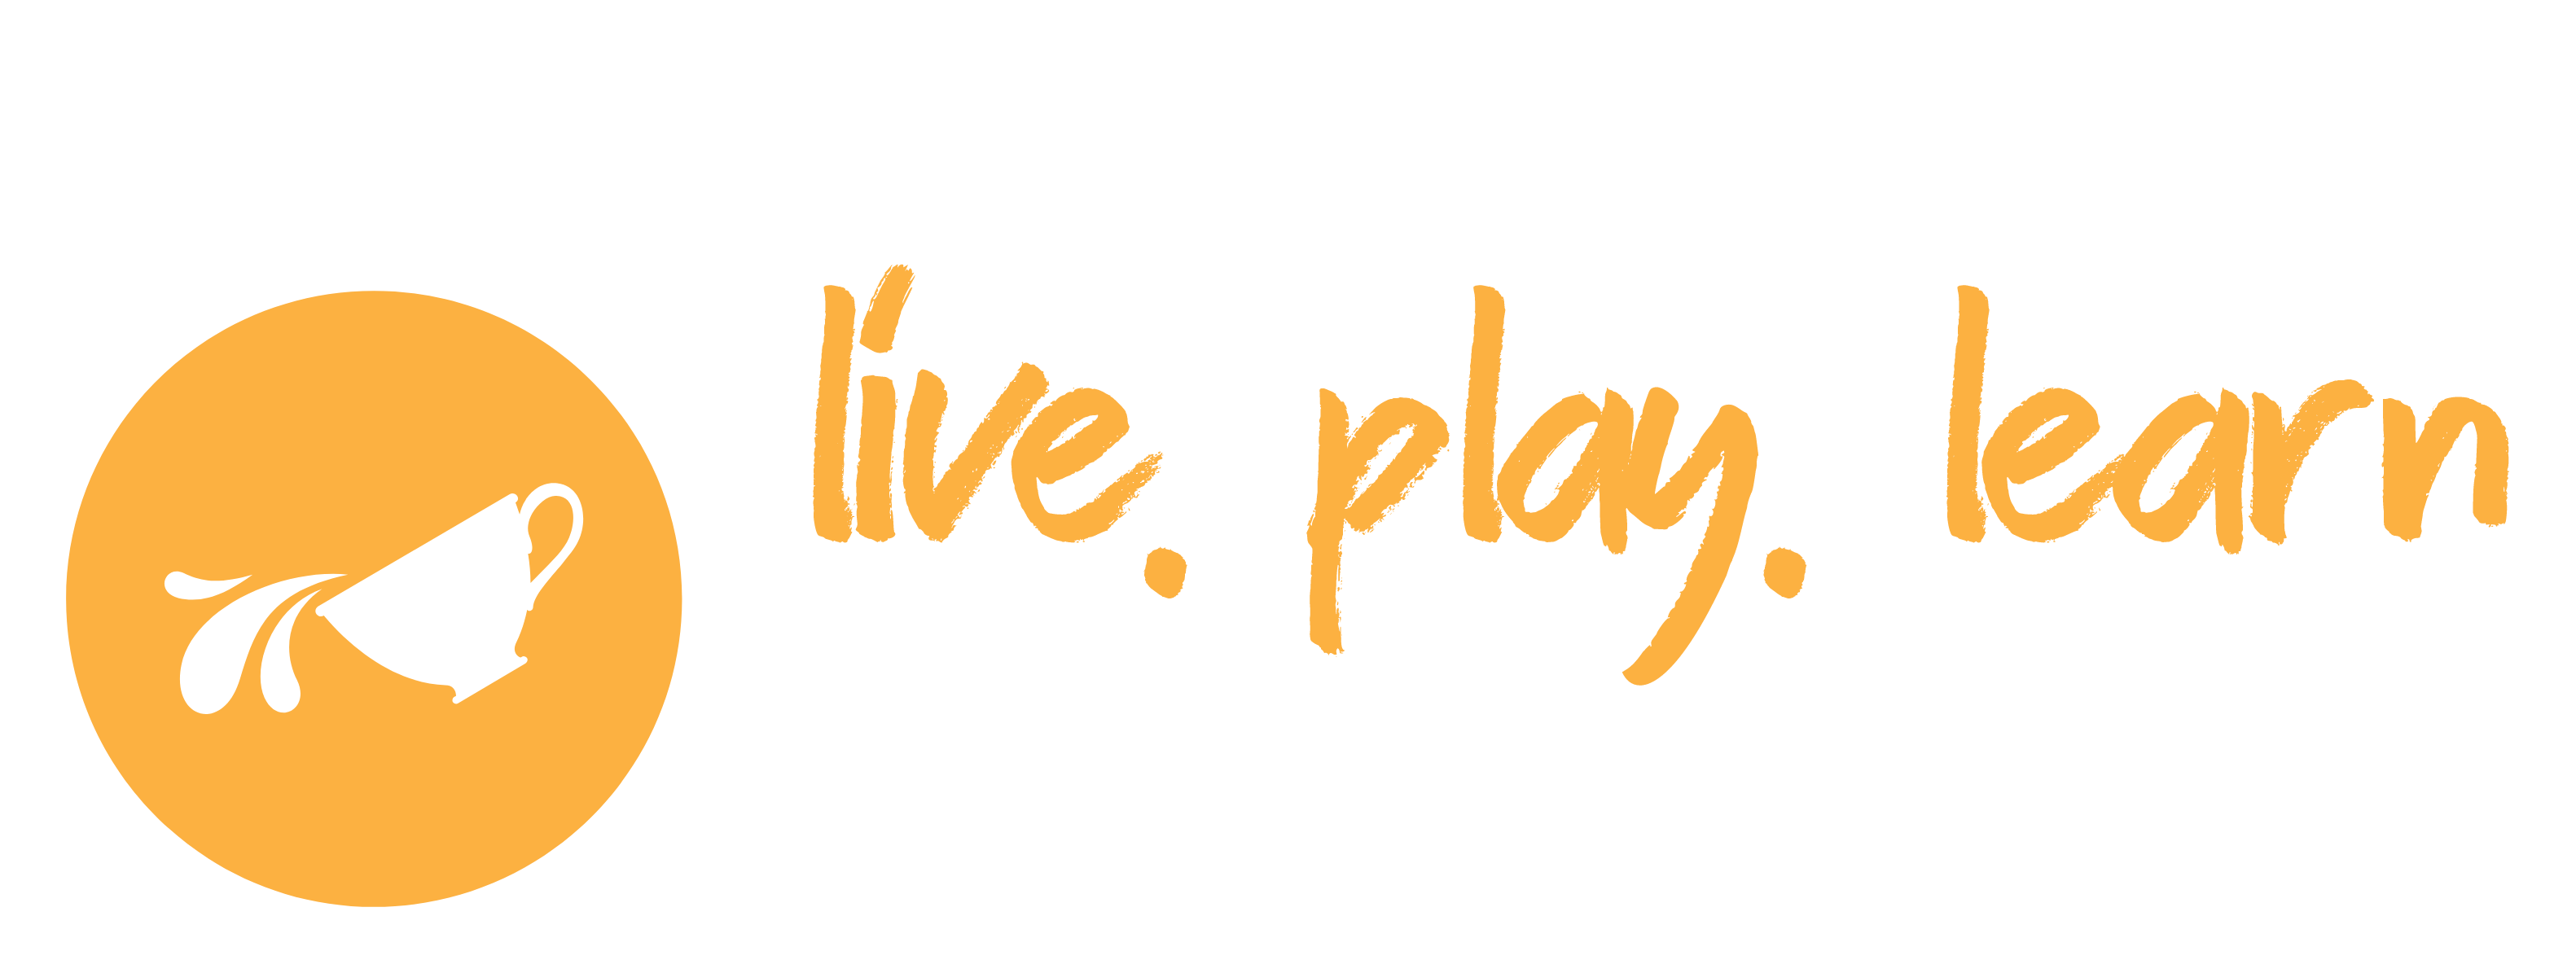 LivePlayLearn